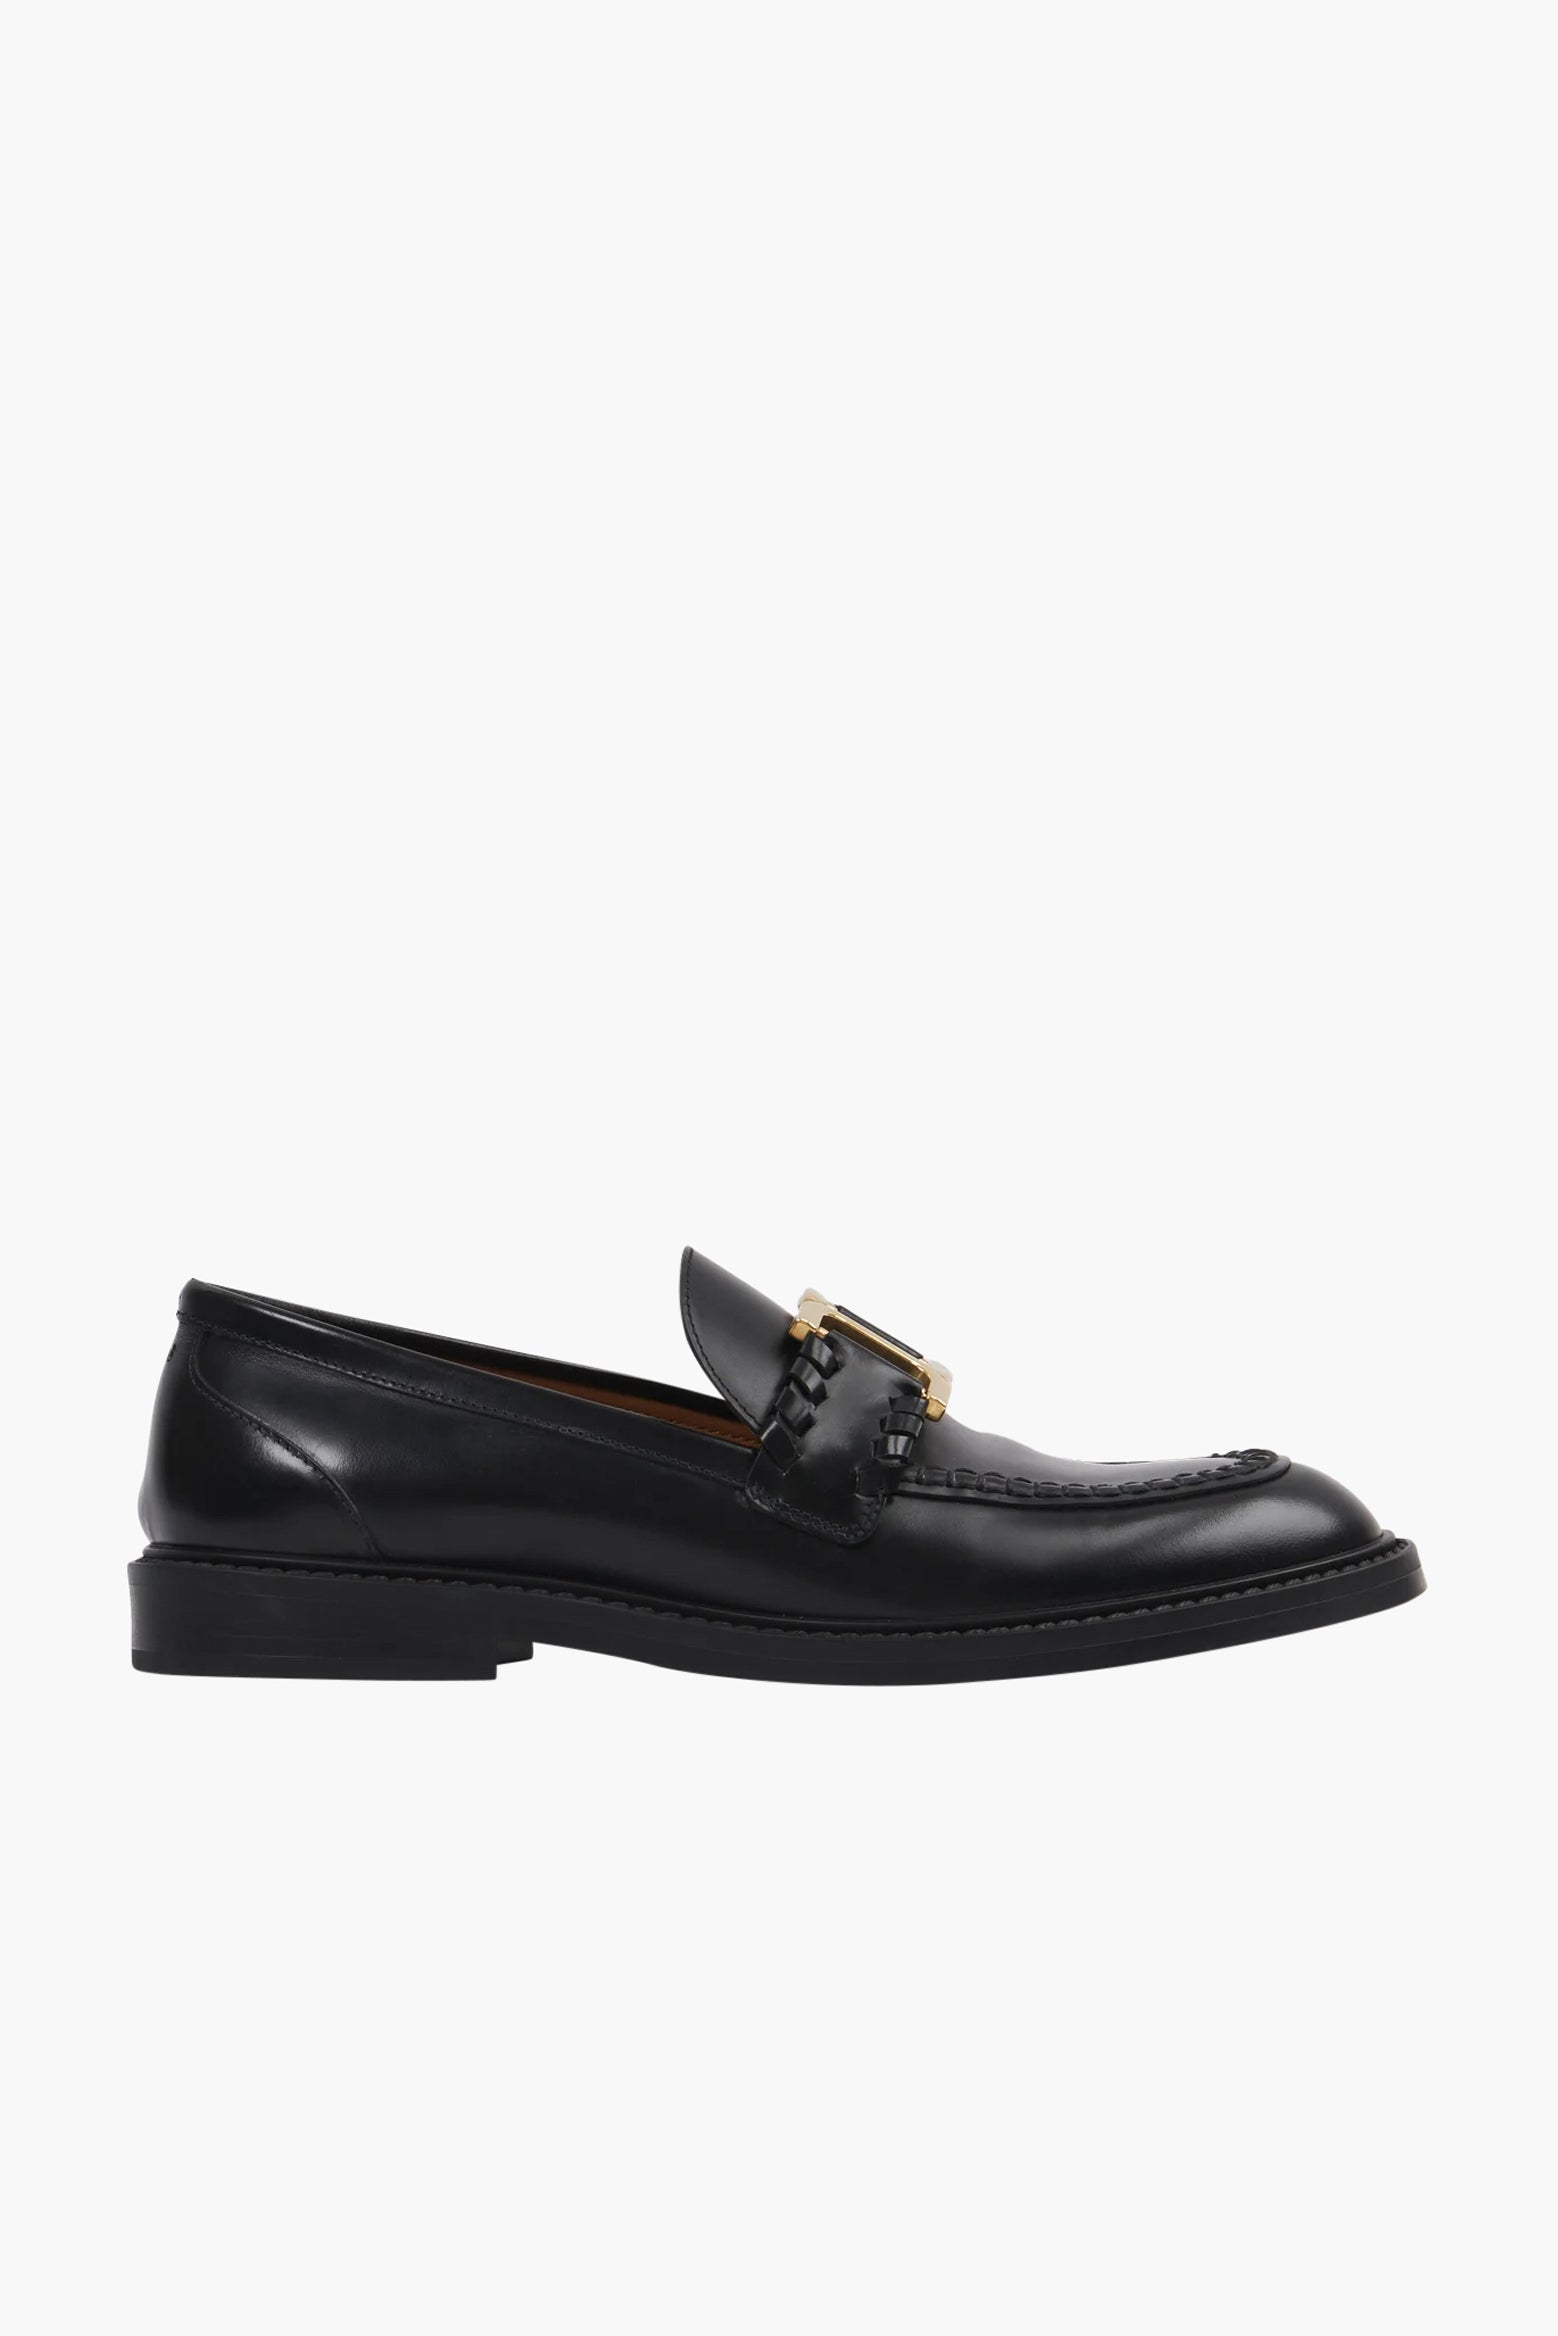 The Chloe Marcie Loafer in Black available at The New Trend Australia.